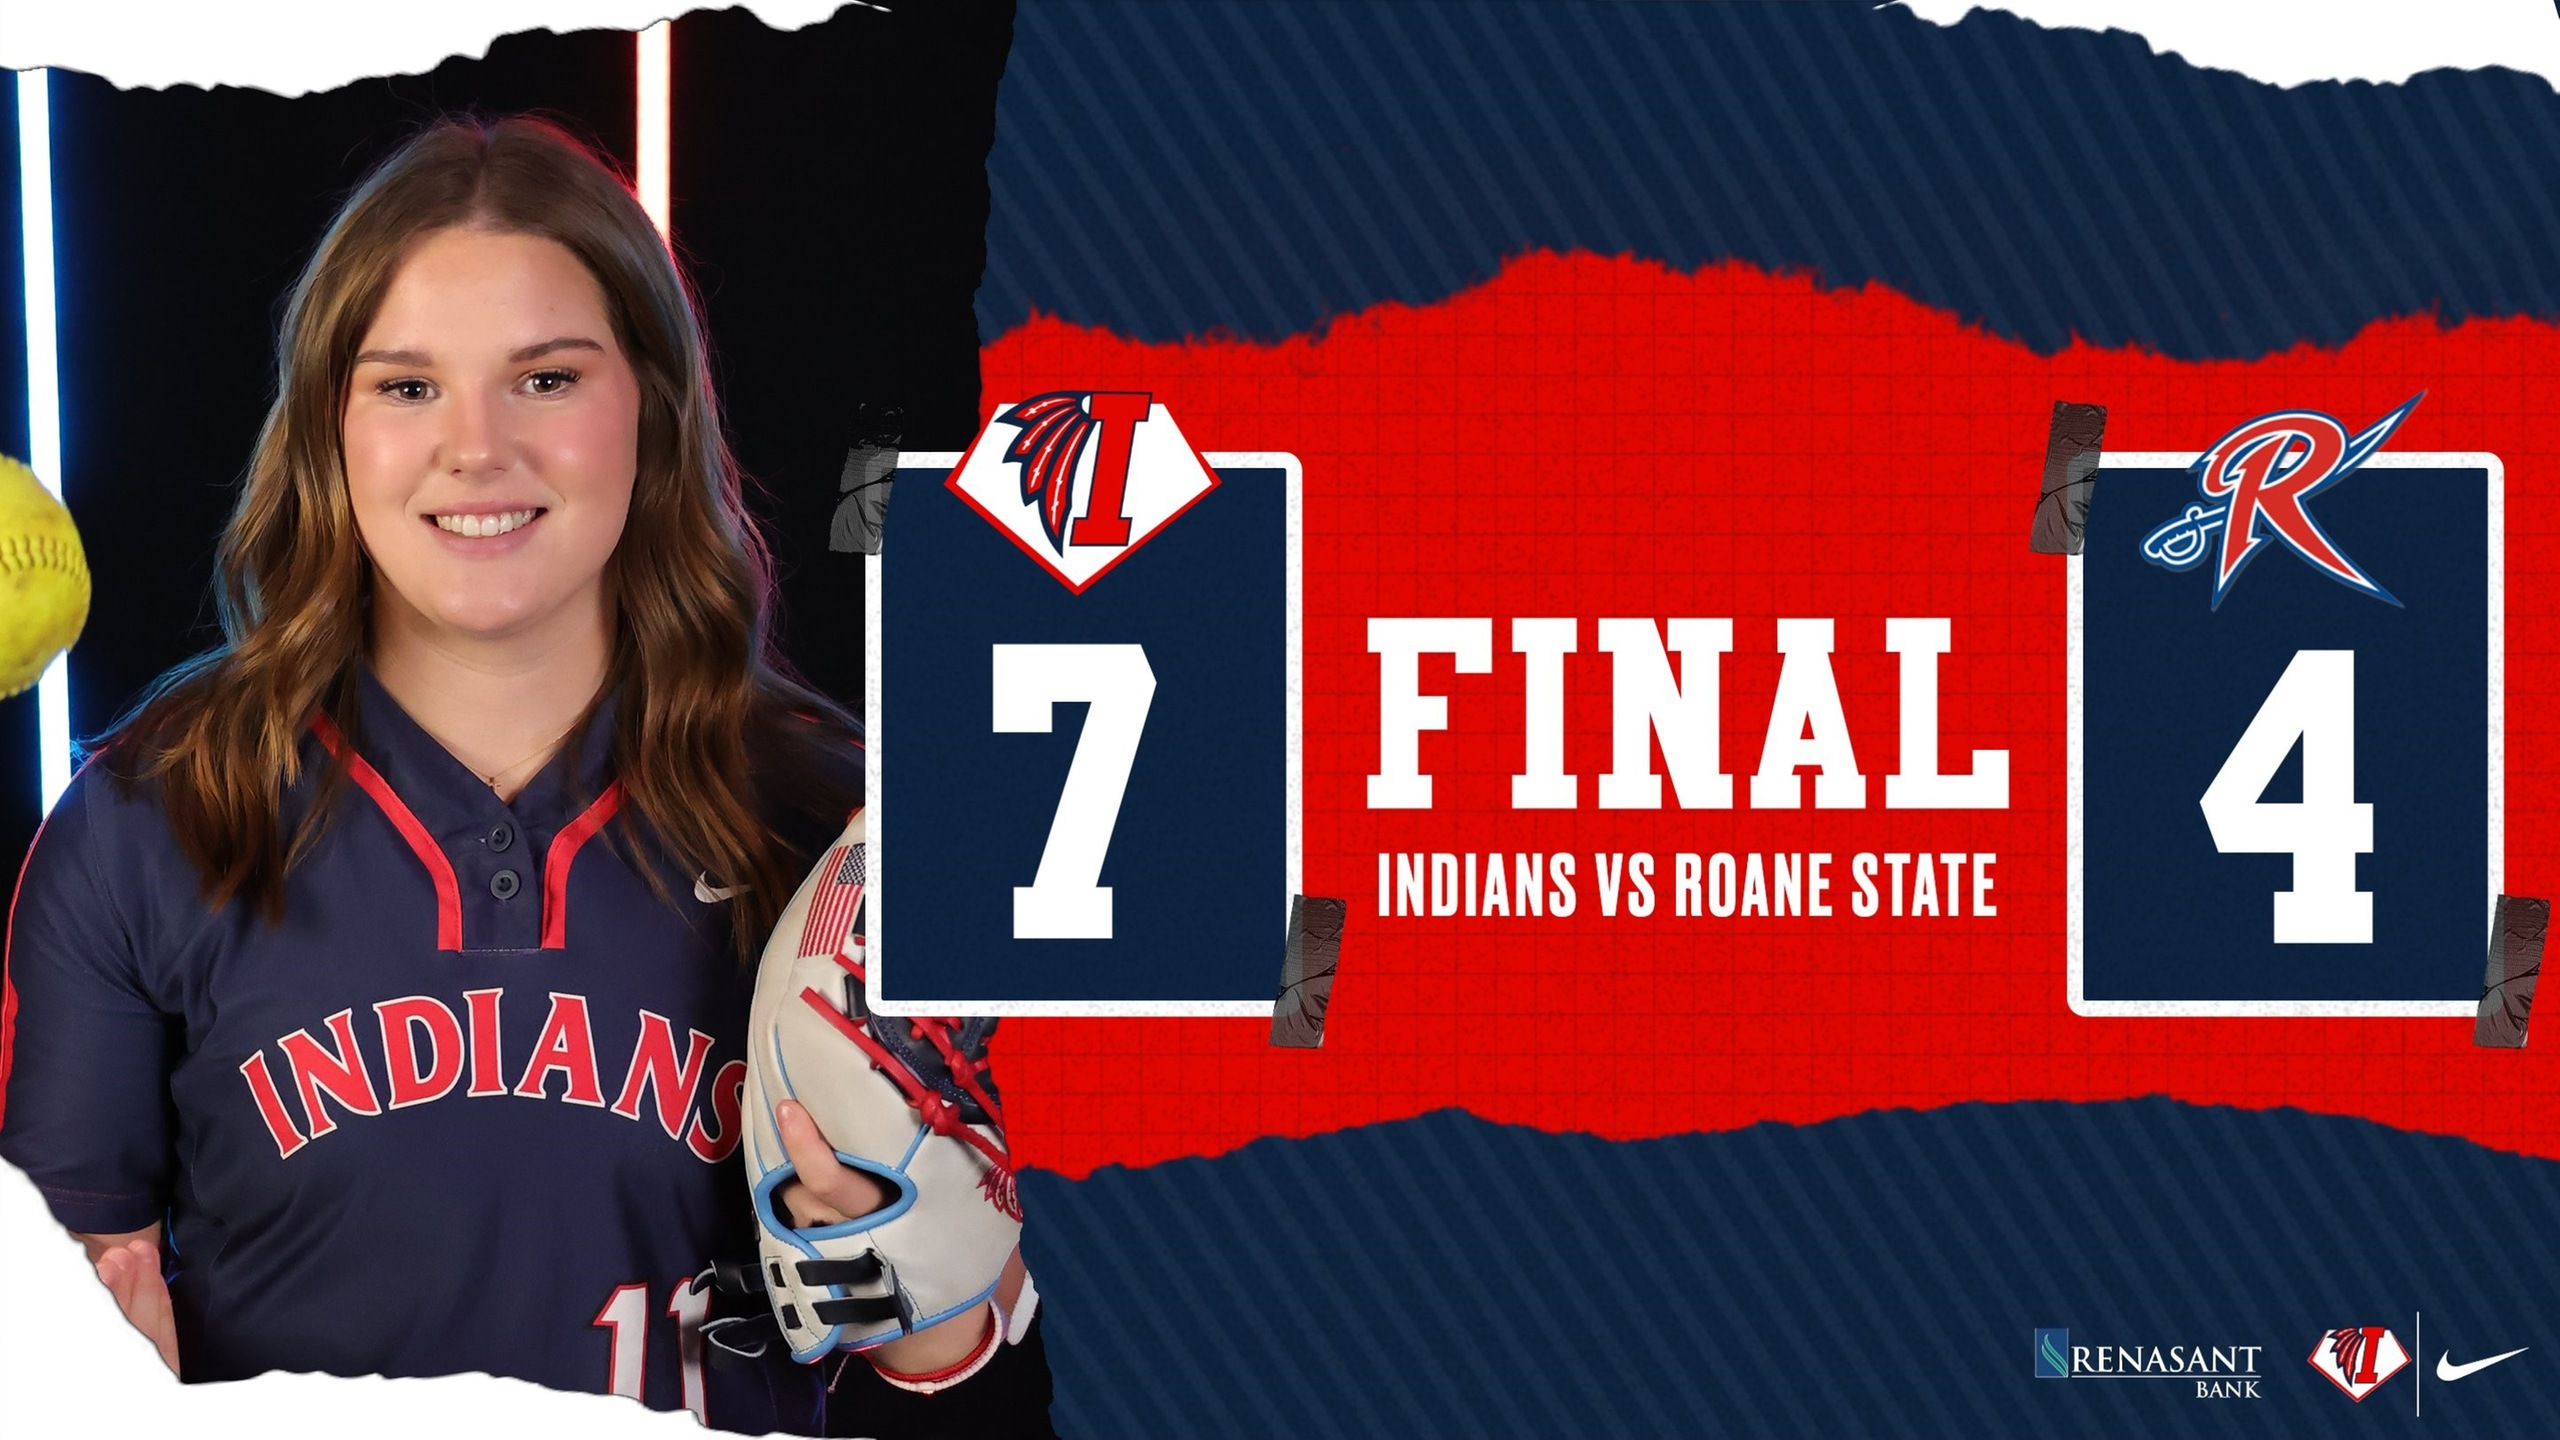 Indians open season with win over Roane State